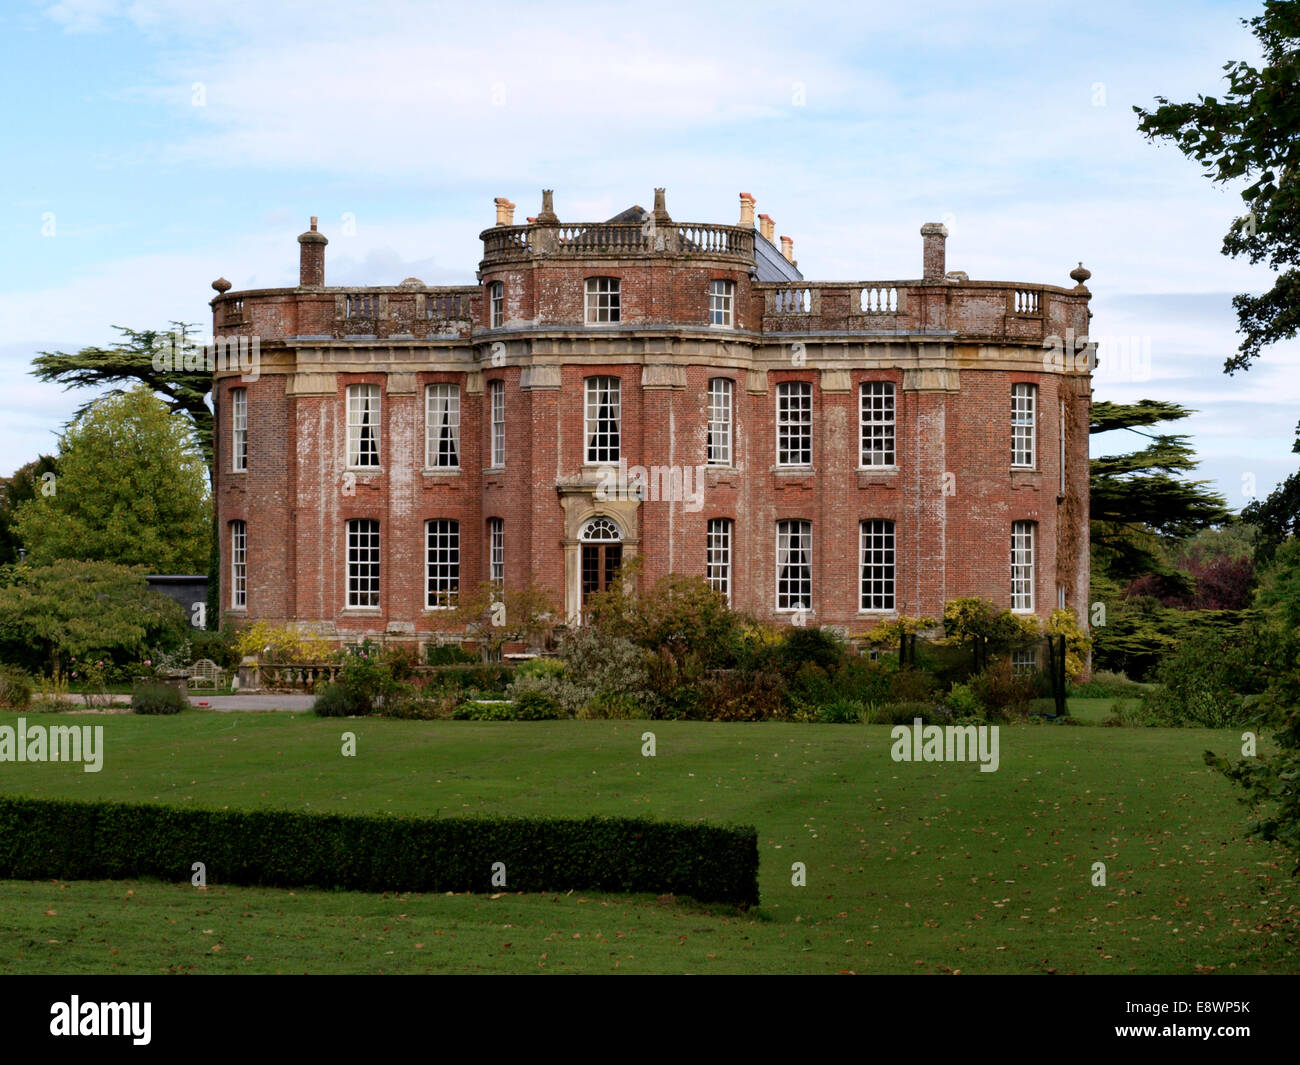 Chettle House, Queen Anne house was commissioned by the Chafin family and designed by Thomas Archer in 1710, Dorset, UK 2013 Stock Photo